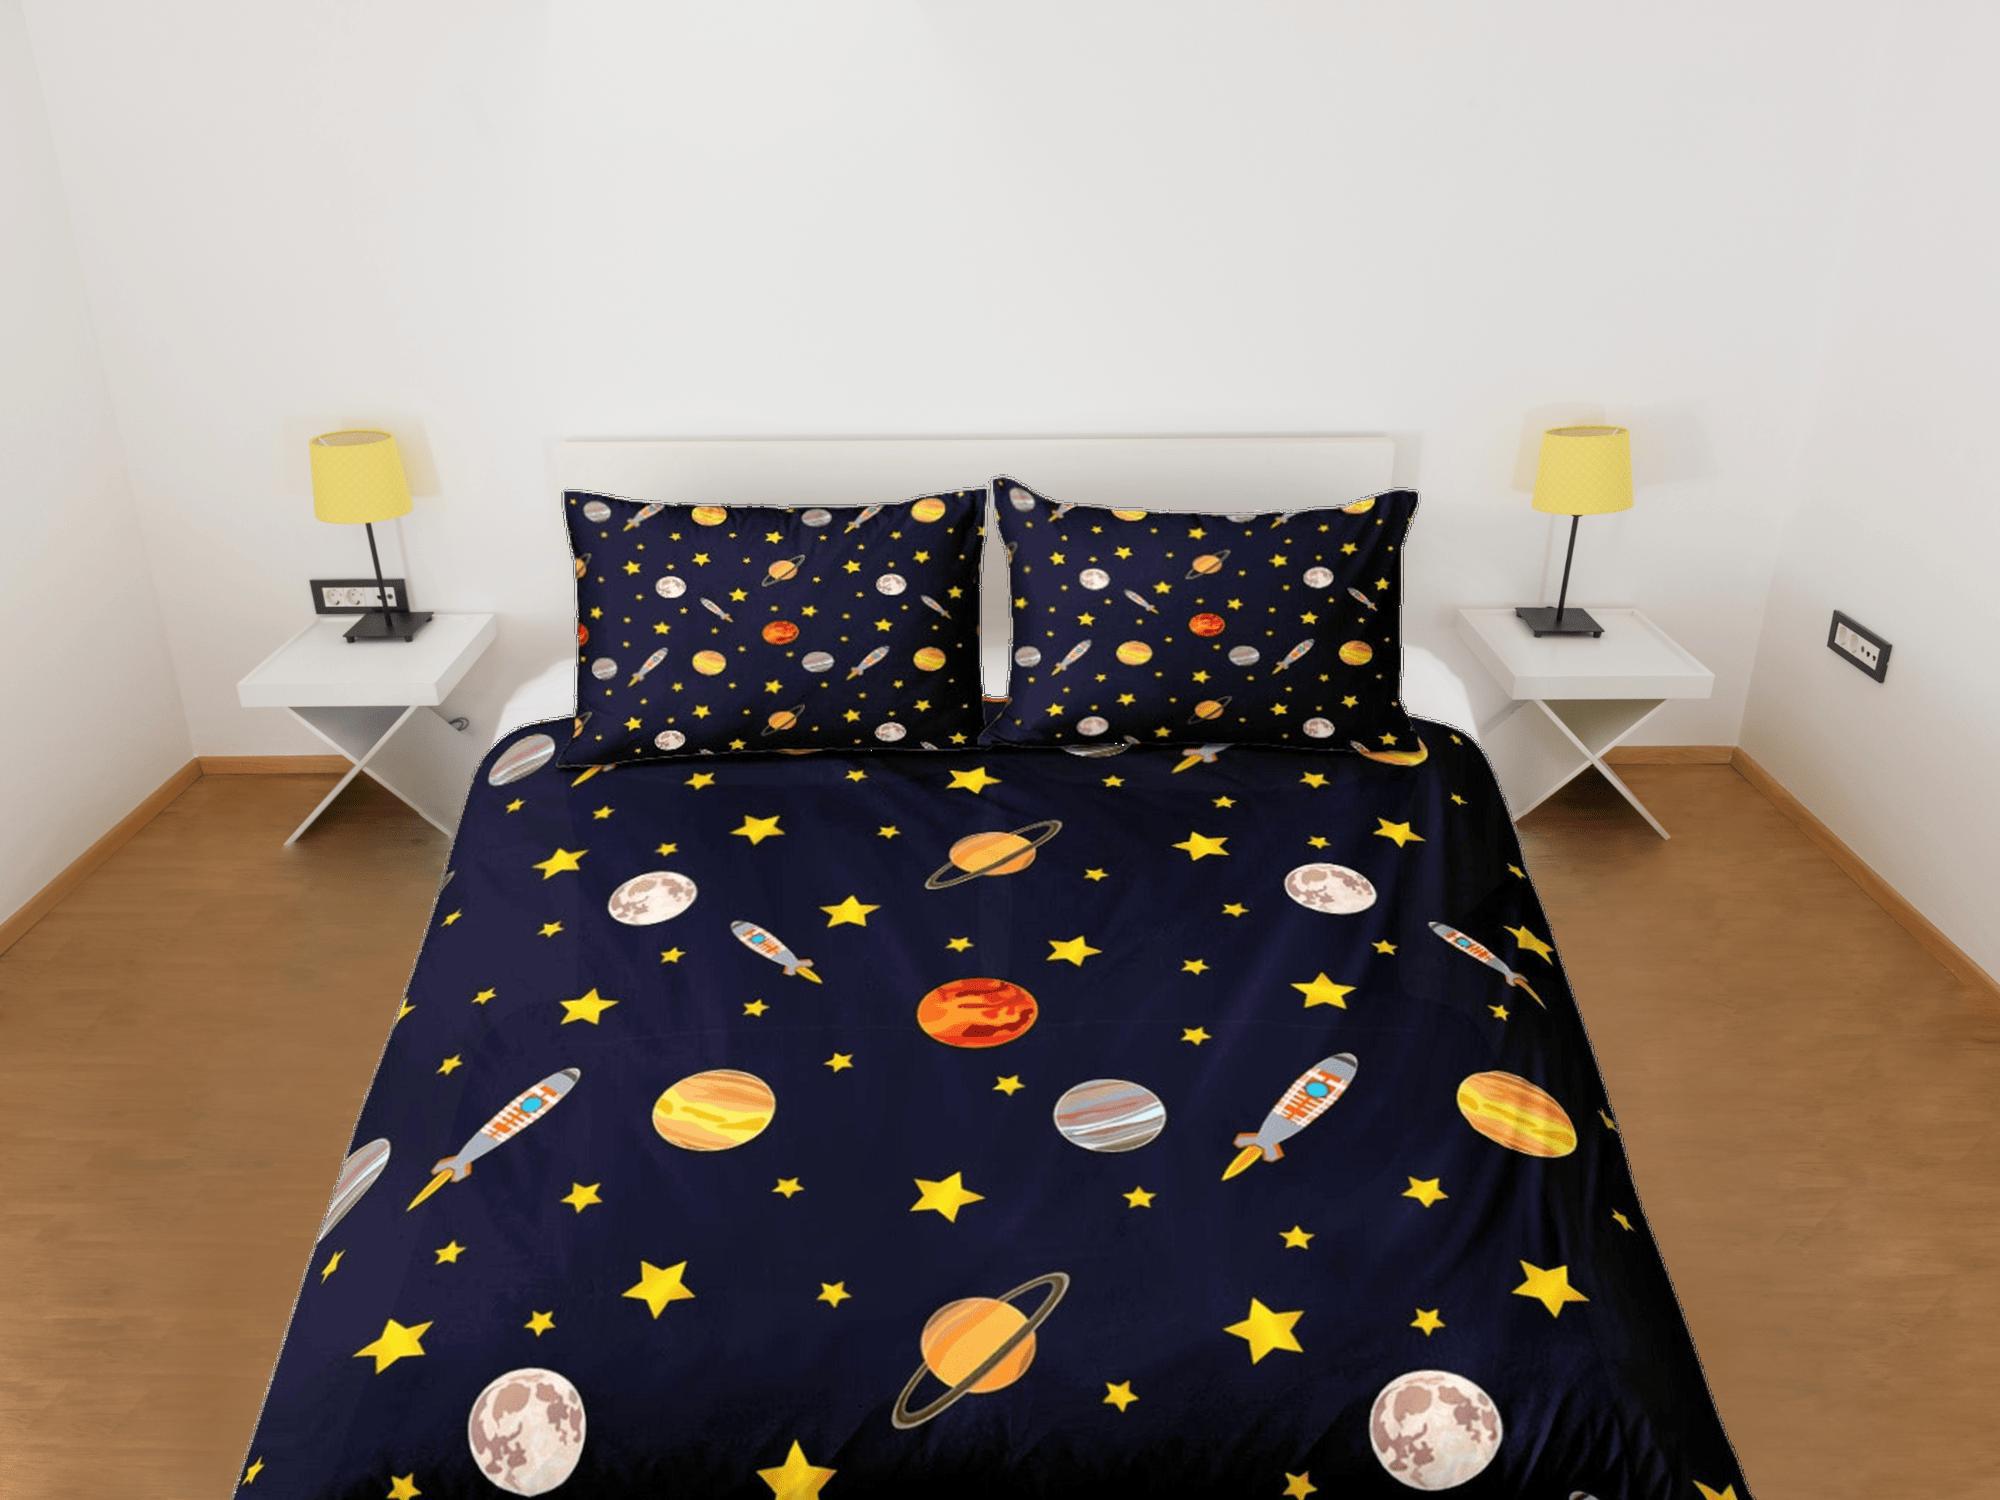 daintyduvet Planets Galaxy Duvet Cover Set Colorful Bedspread, Teens Kids Bedding & Pillowcase